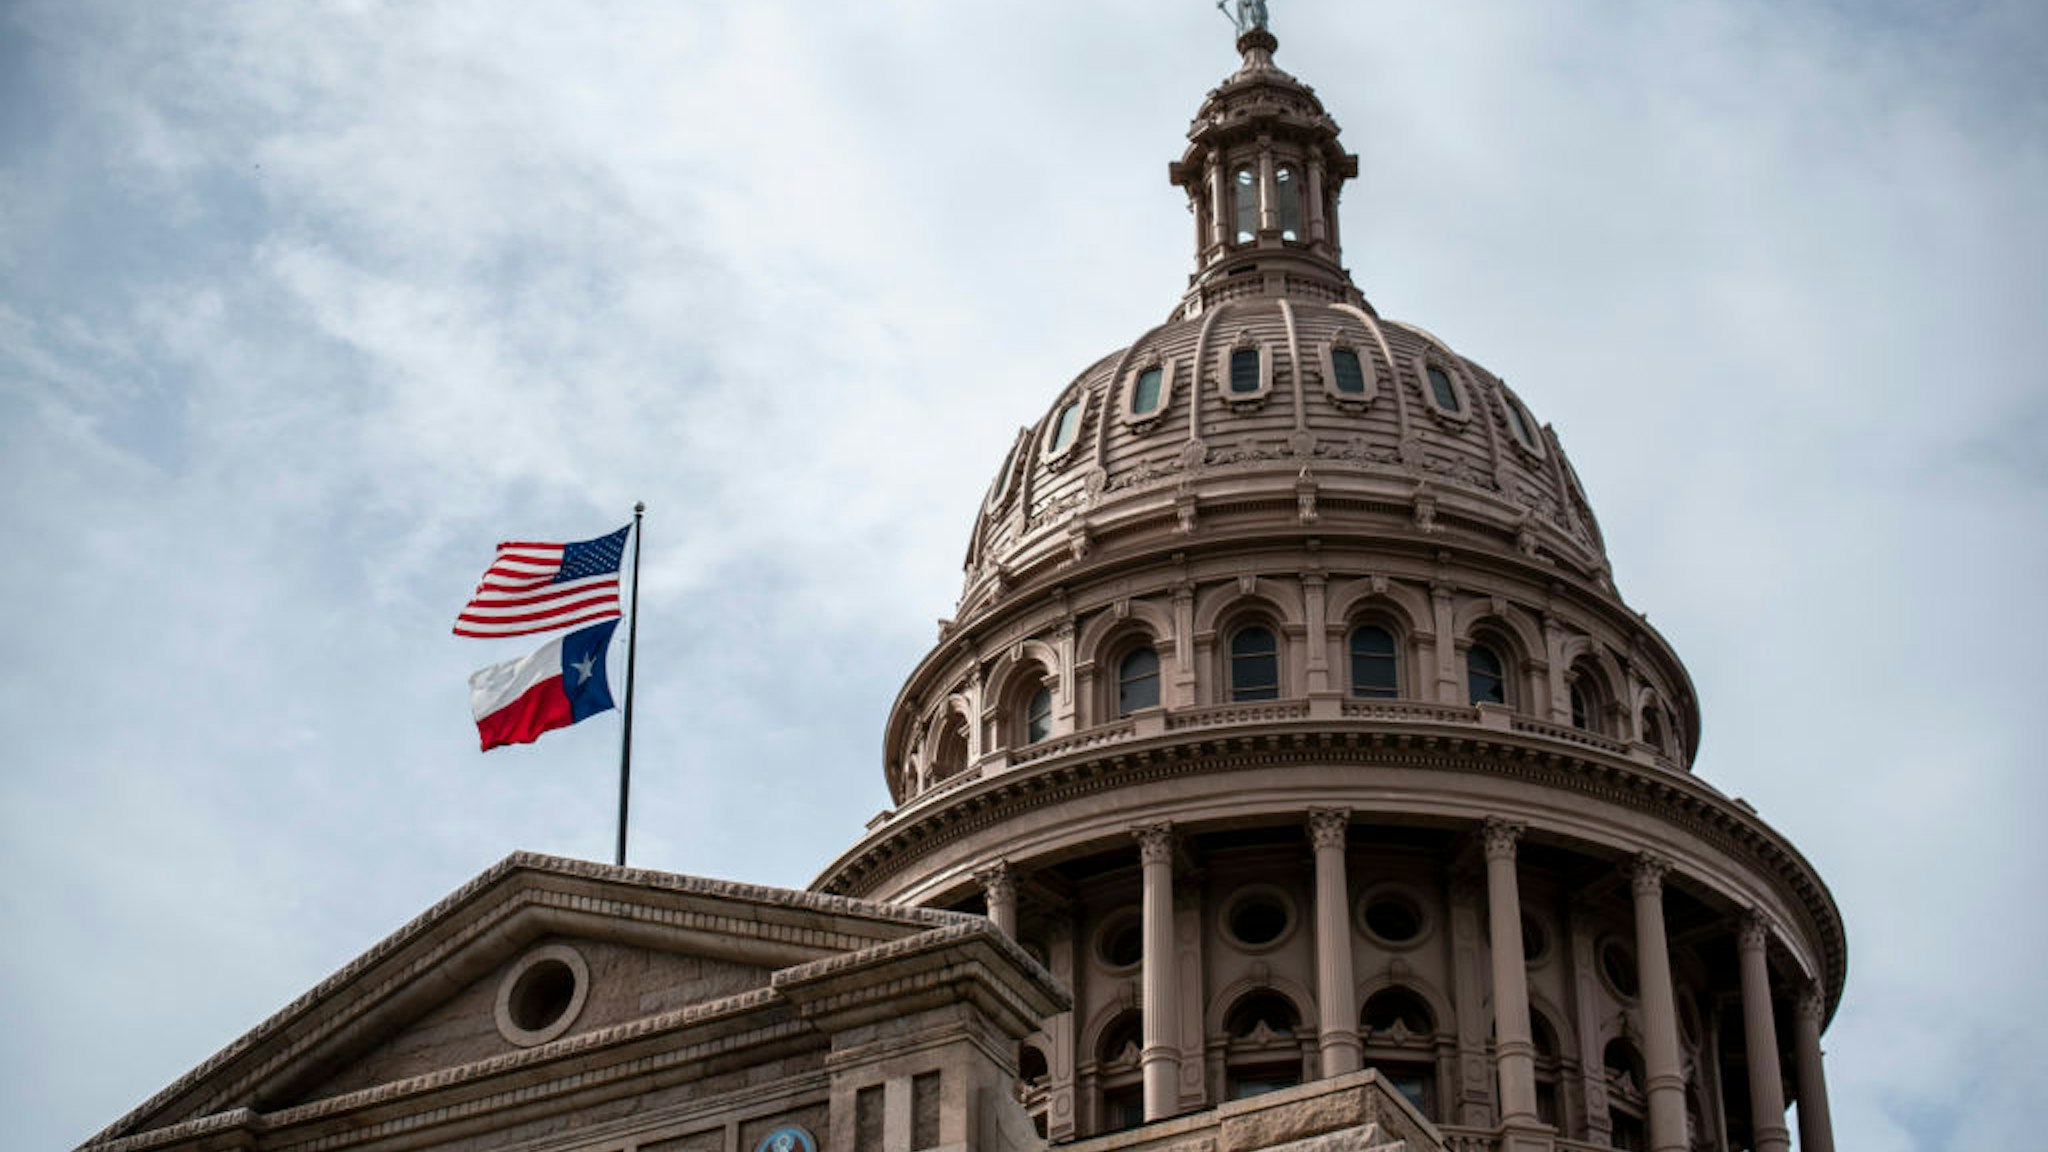 AUSTIN, TX - JULY 12: The U.S. and Texas state flags fly over the state Capitol building on July 12, 2021 in Austin, Texas. Texas Democrats have fled the state in order to prevent a quorum in protest over a Republican voting protection bill that they say is too restrictive.